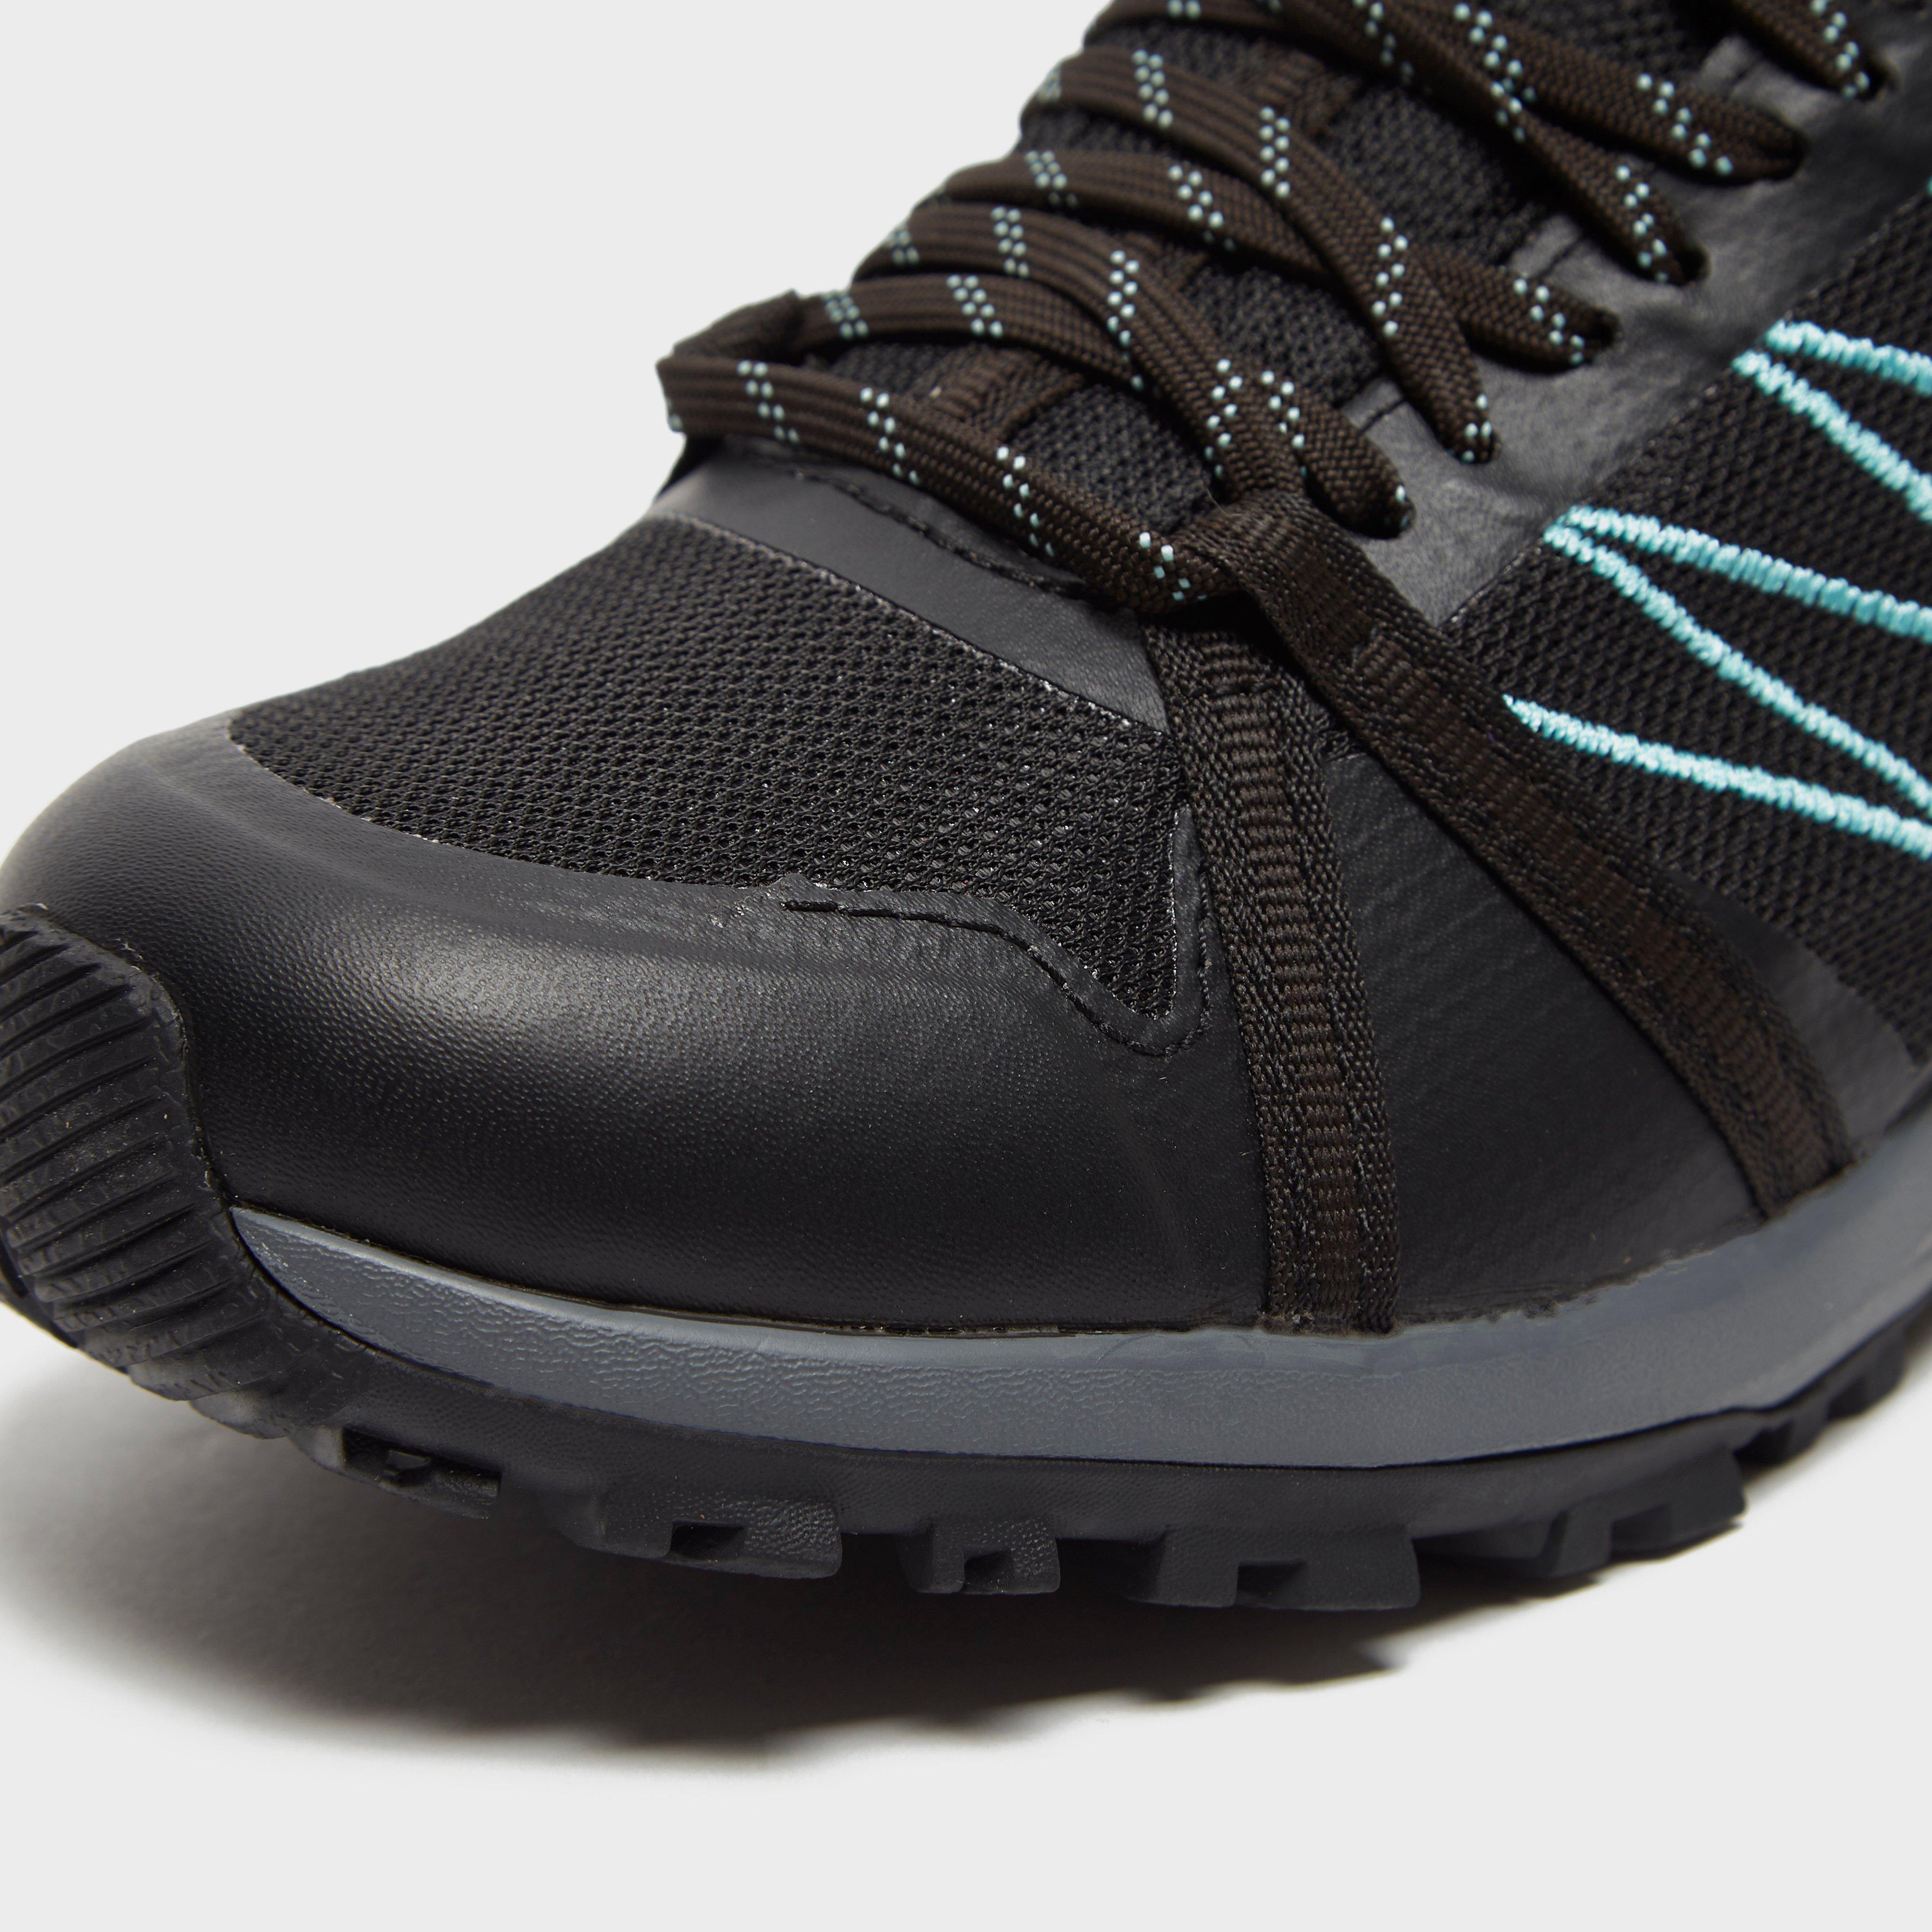 the north face women's litewave fastpack hiking shoes